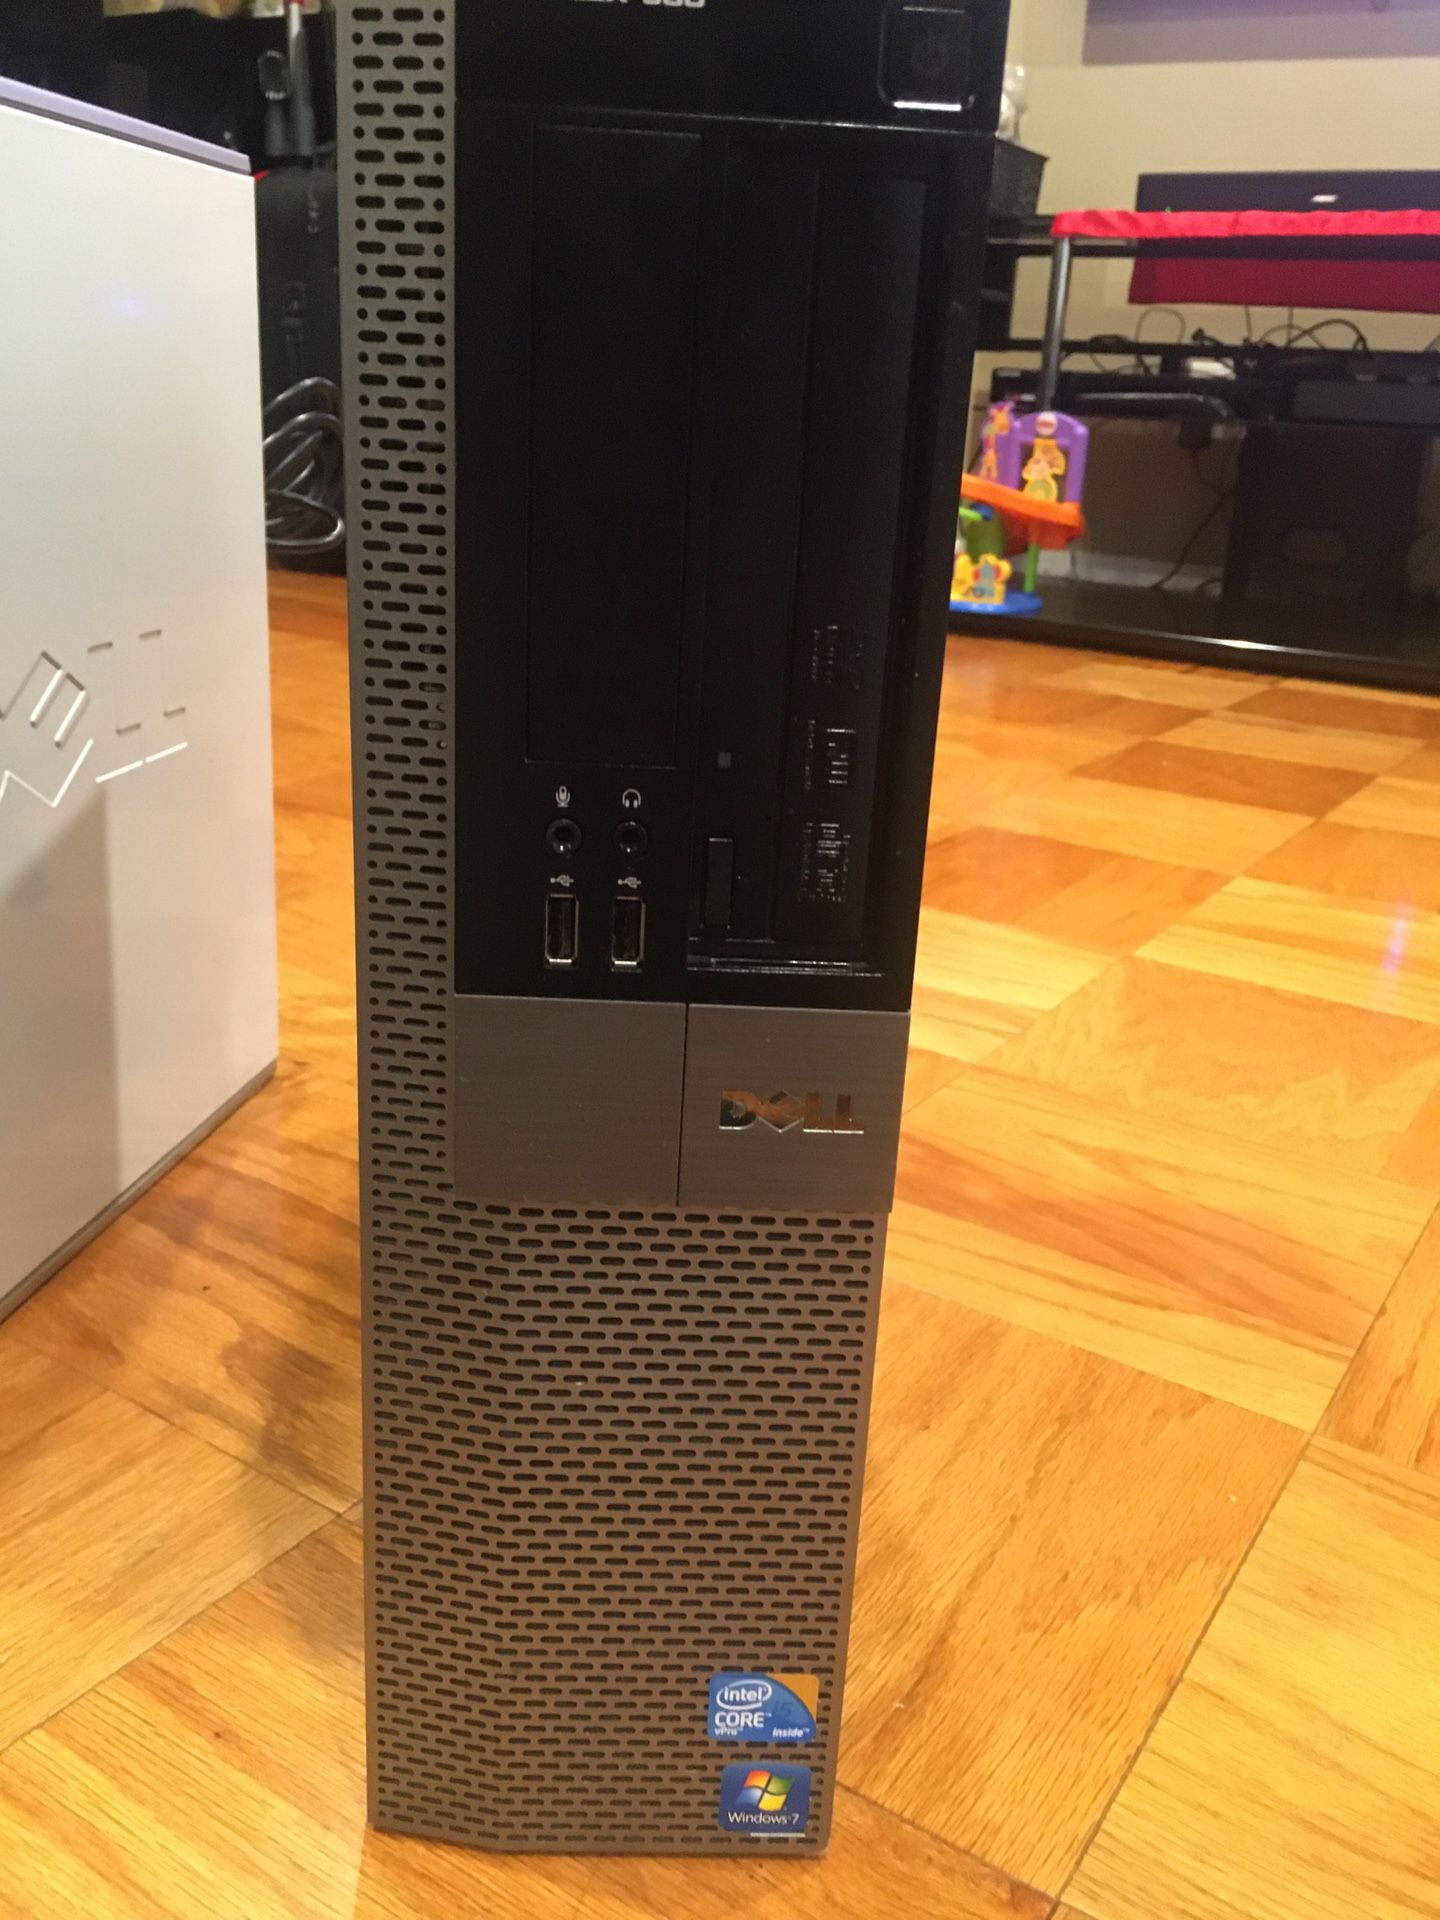 Dell Optilex 980 i5 (not hard drive included)